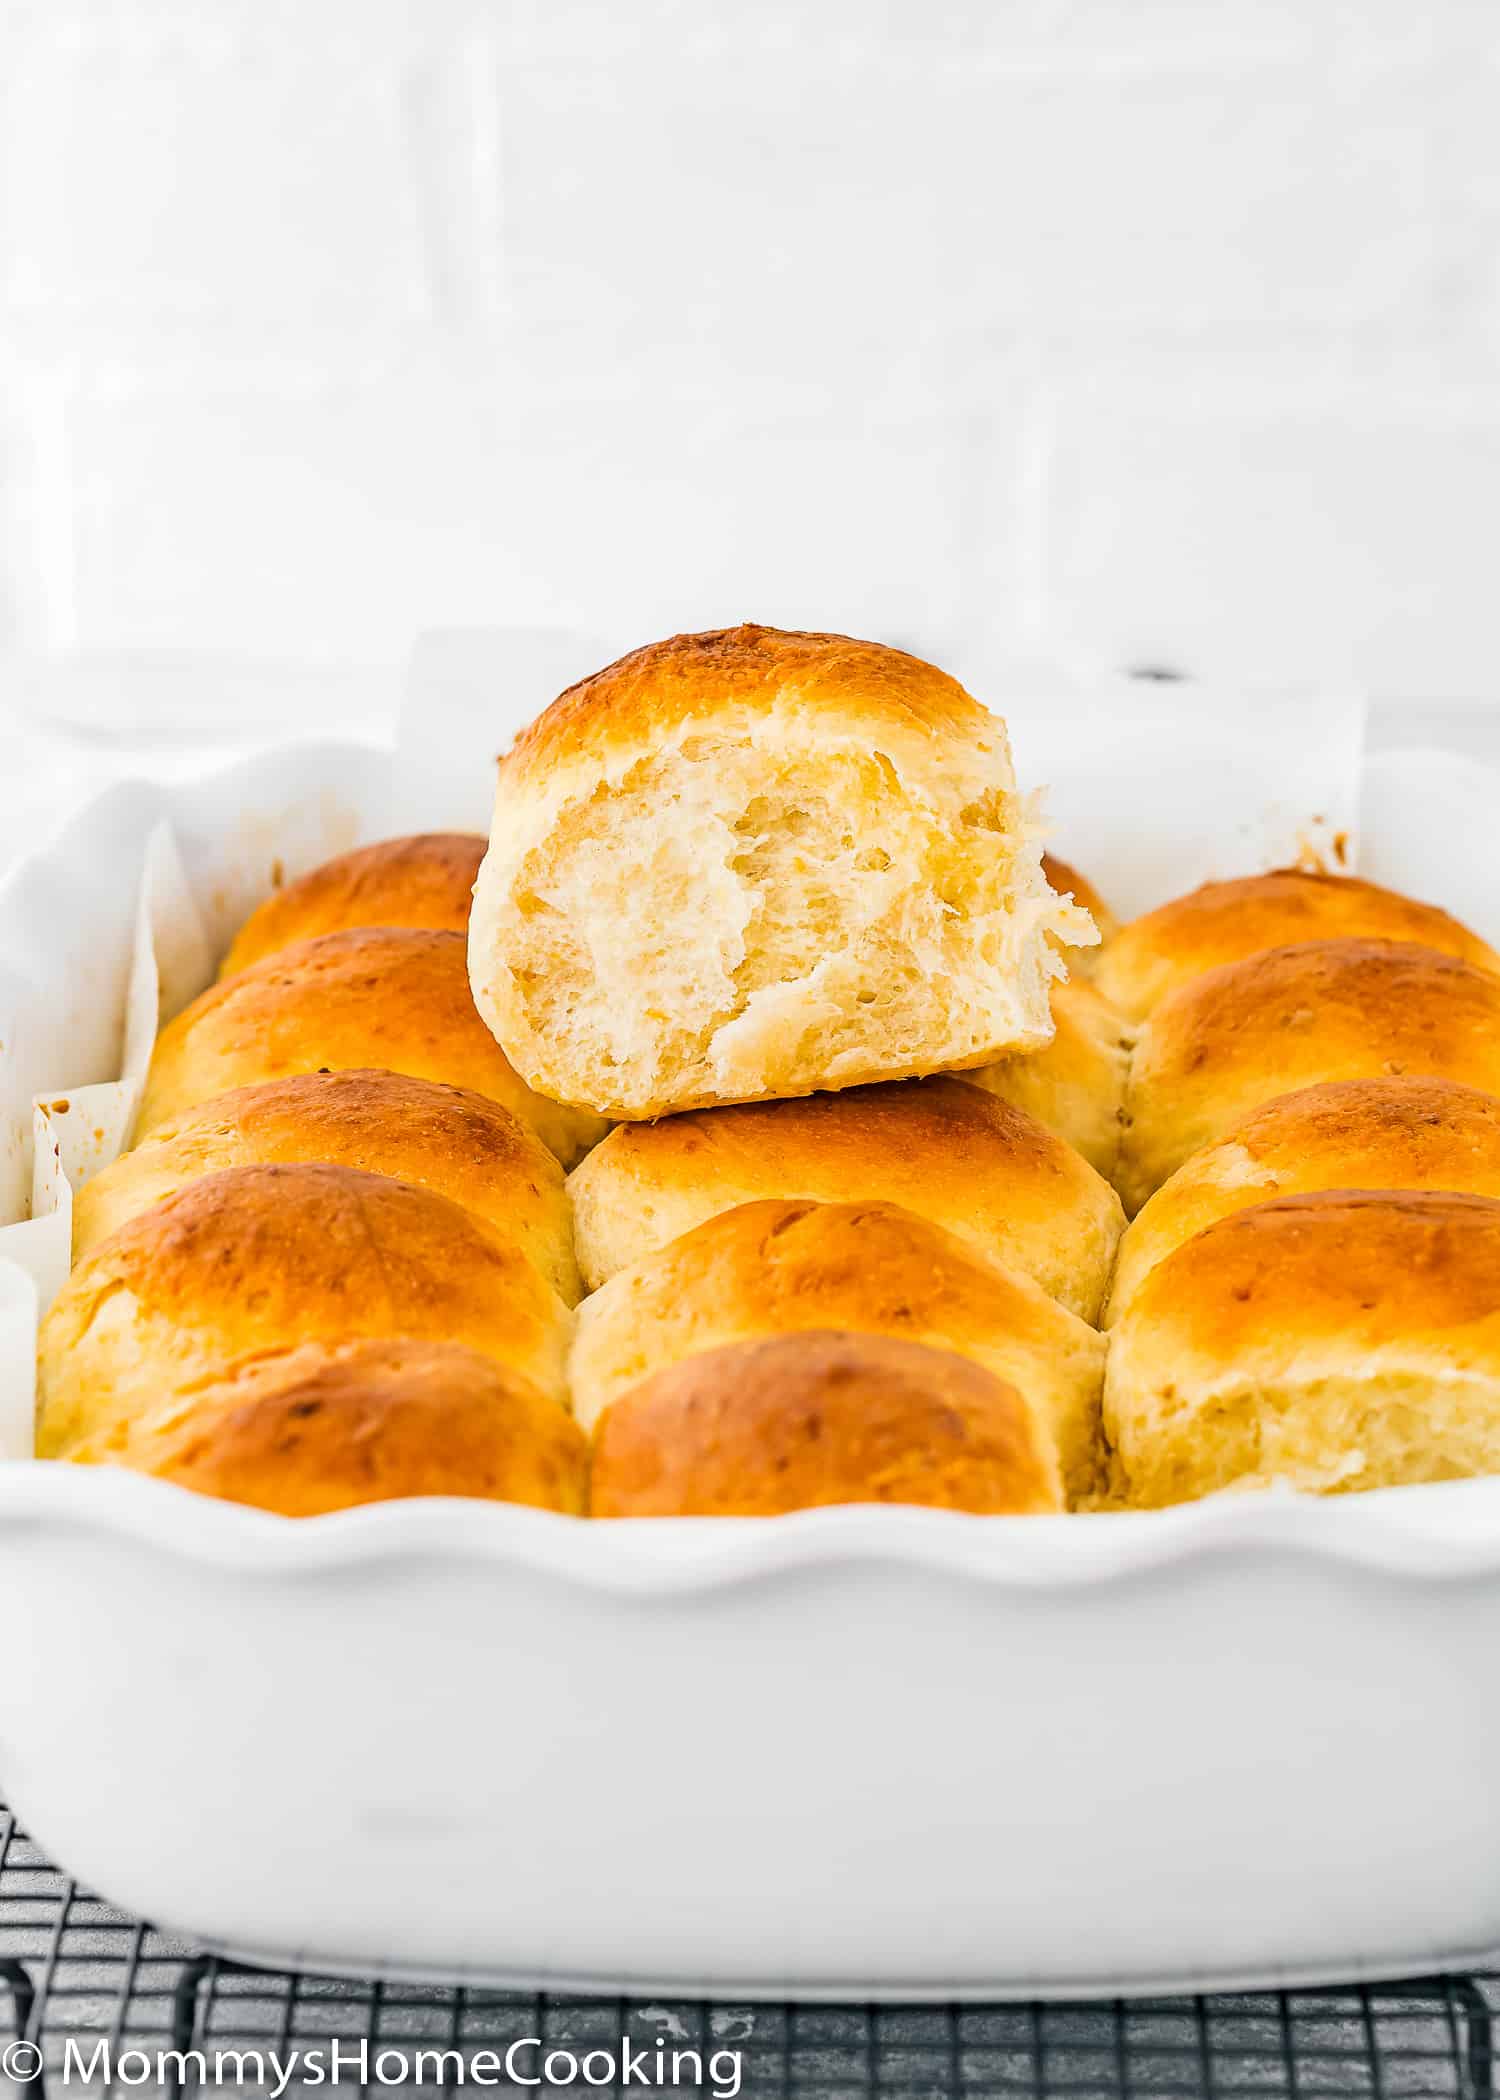 a egg-free homemade hawaiian roll over a baking pan with more rolls.